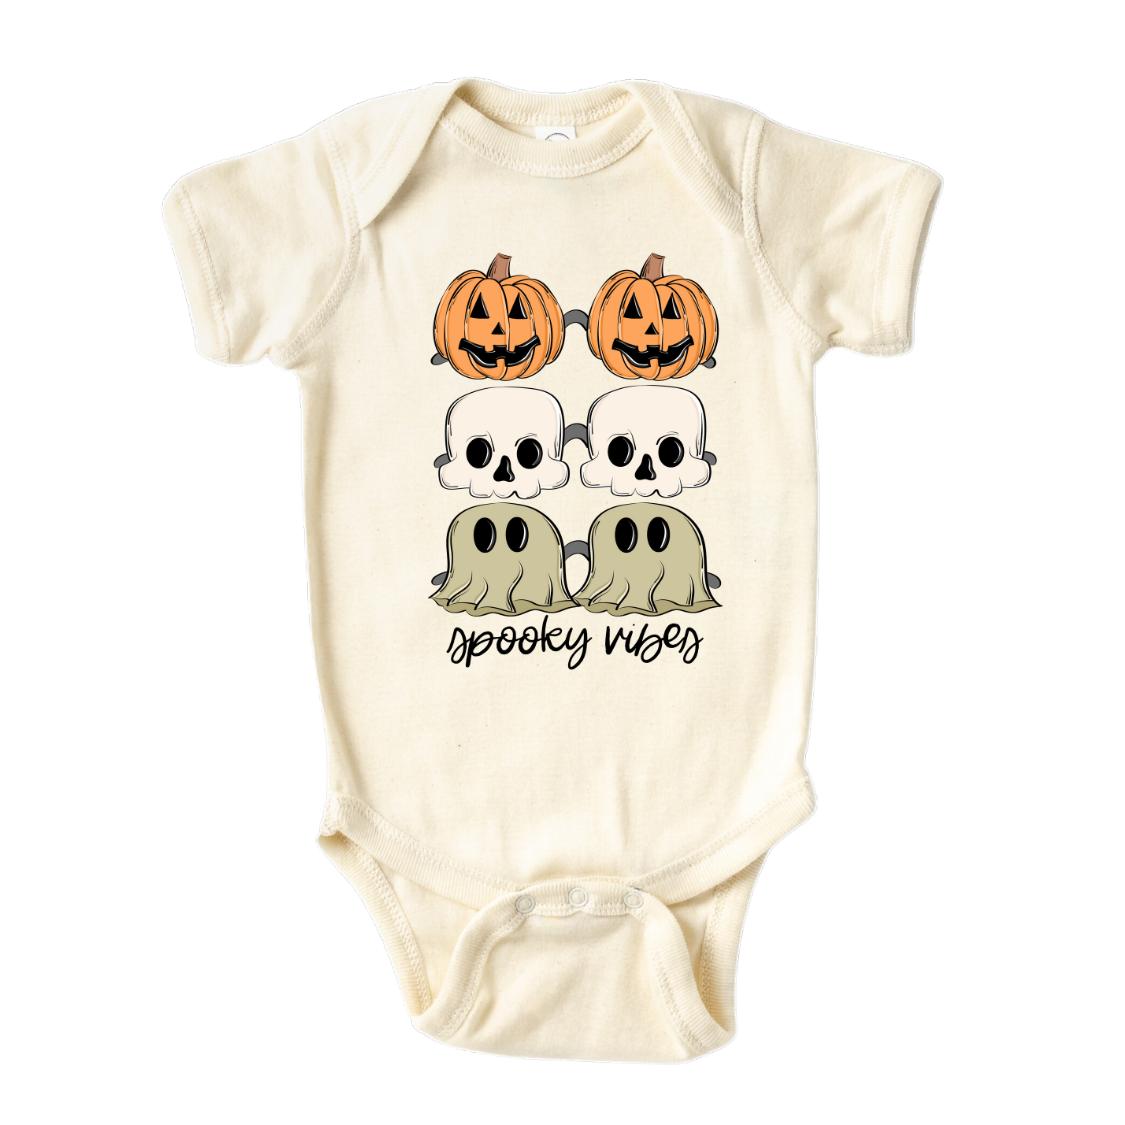 Halloween Baby Onesie - Cute Bay Gift for Kid's t-shirt with a cute Halloween icons design and 'Spooky Vibes' text.